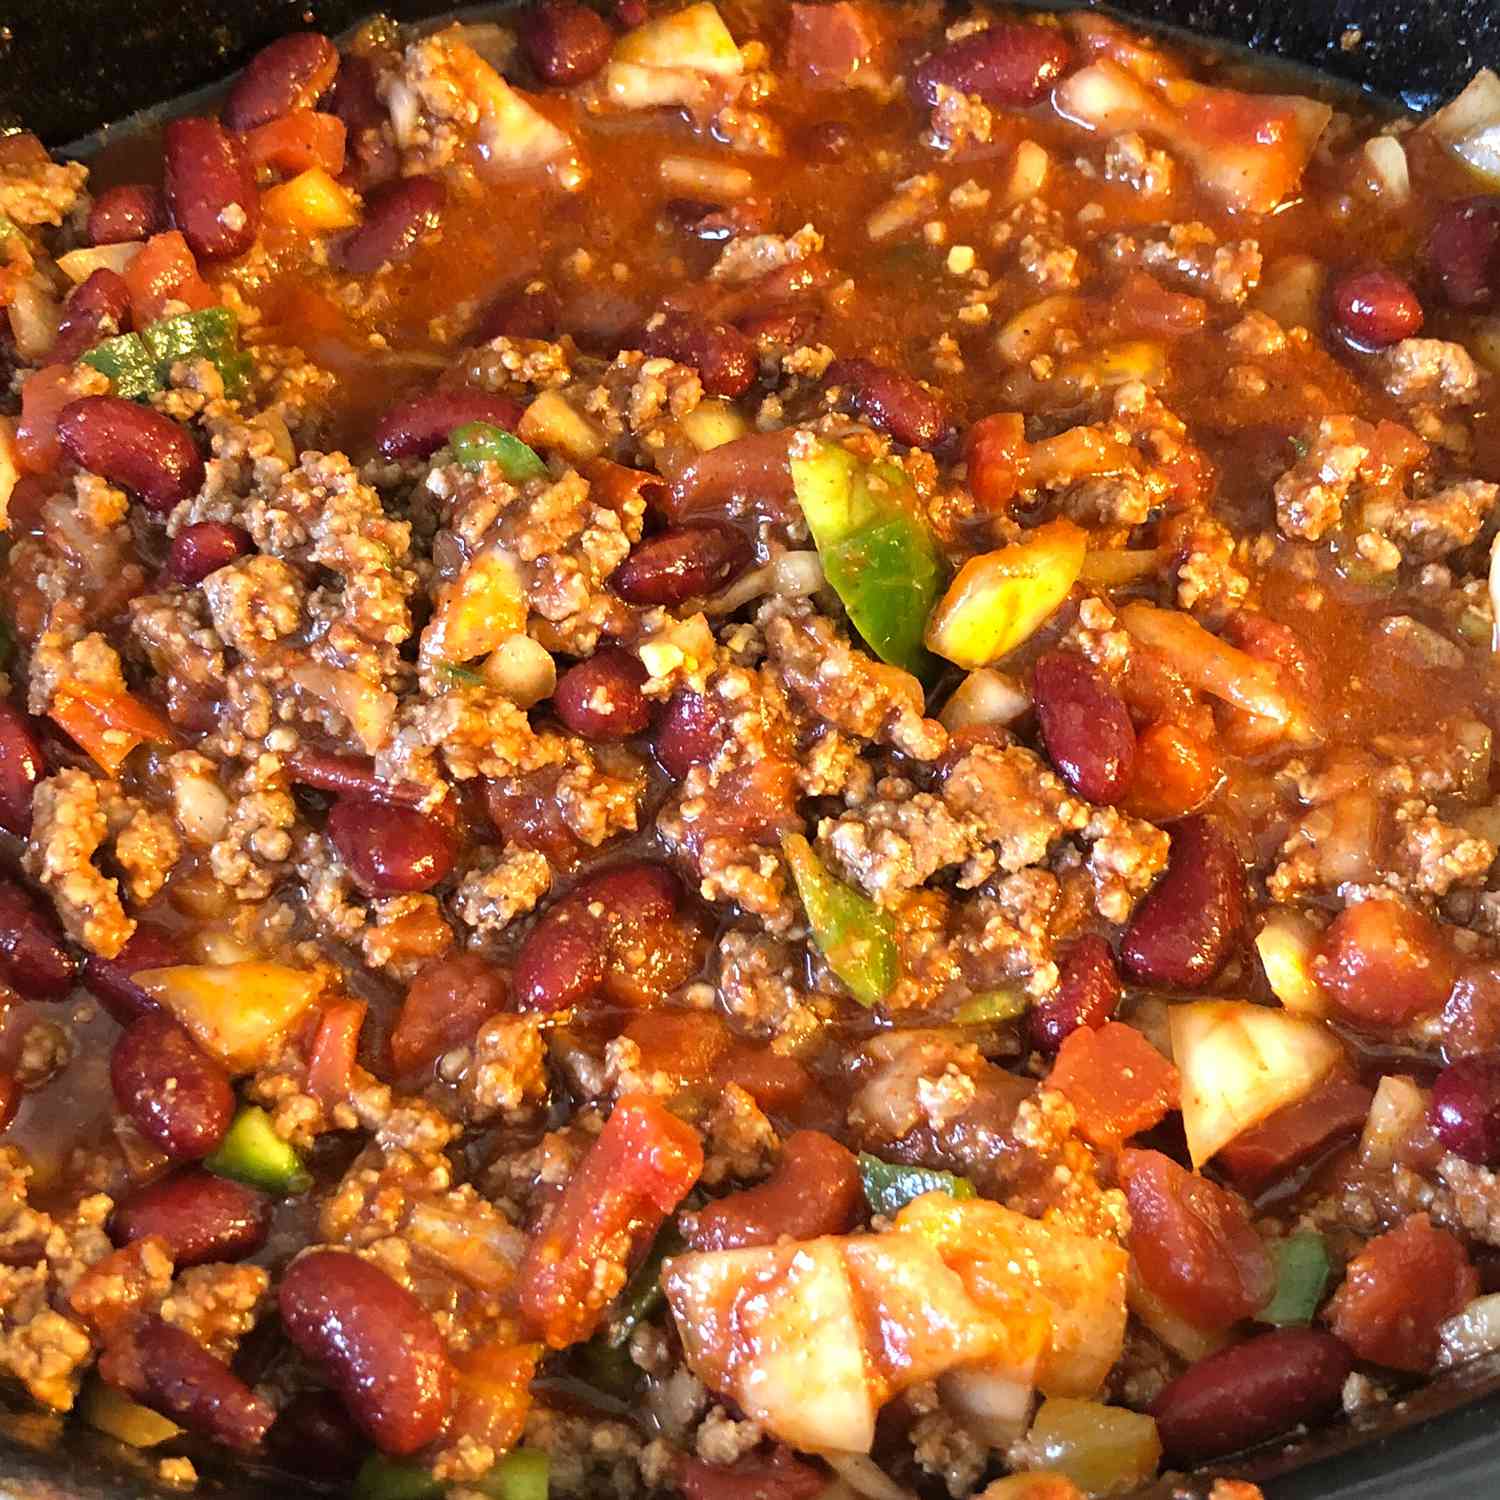 close up view of spicy chili in a slow cooker